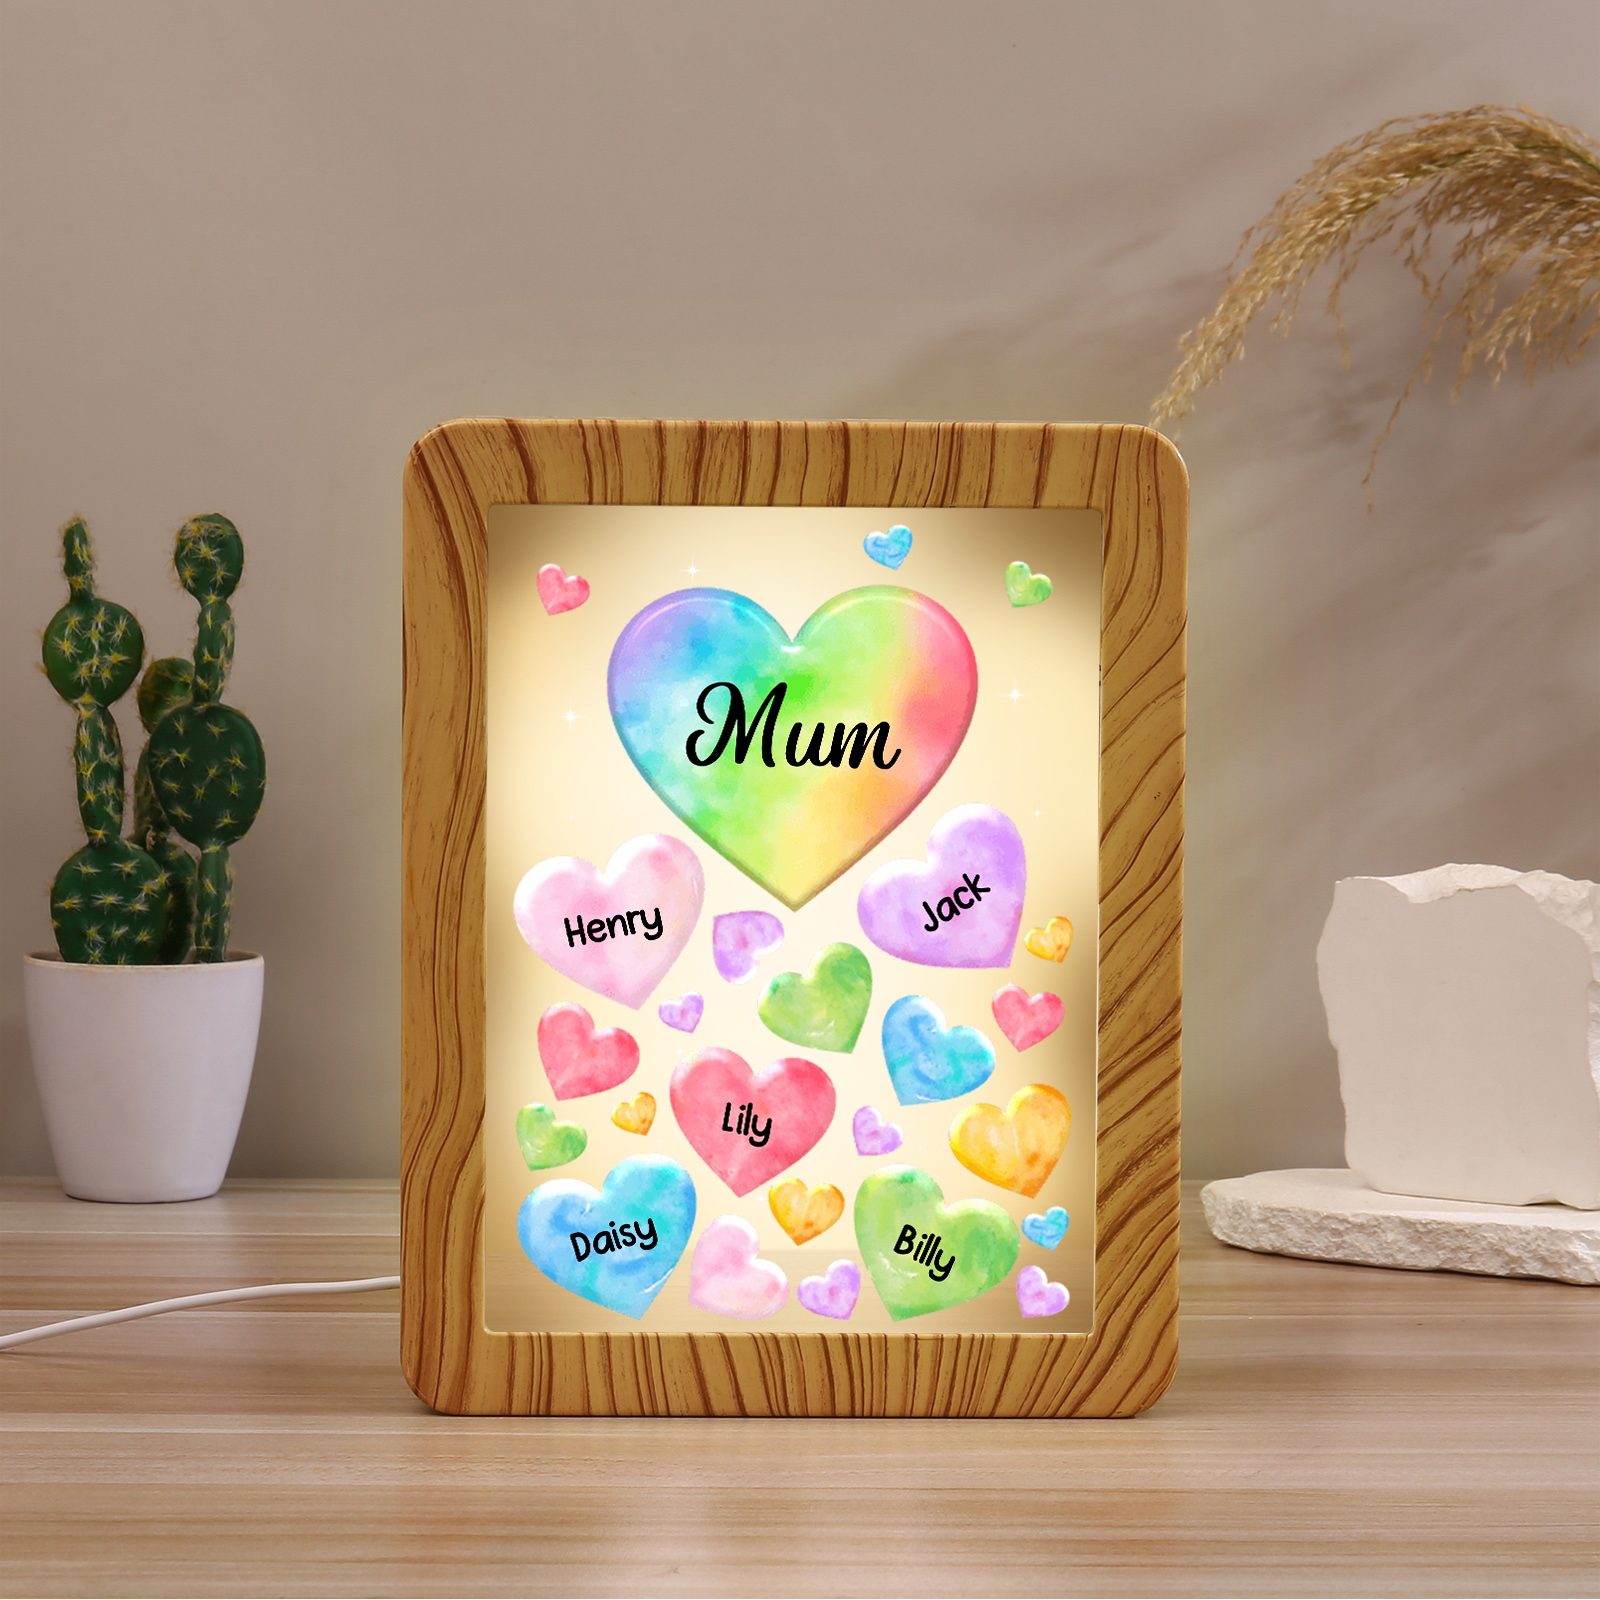 5 Name - Personalized Mum Home Wood Color Plug-in Mirror Photo Frame Custom Text LED Night Light Gift for Mum